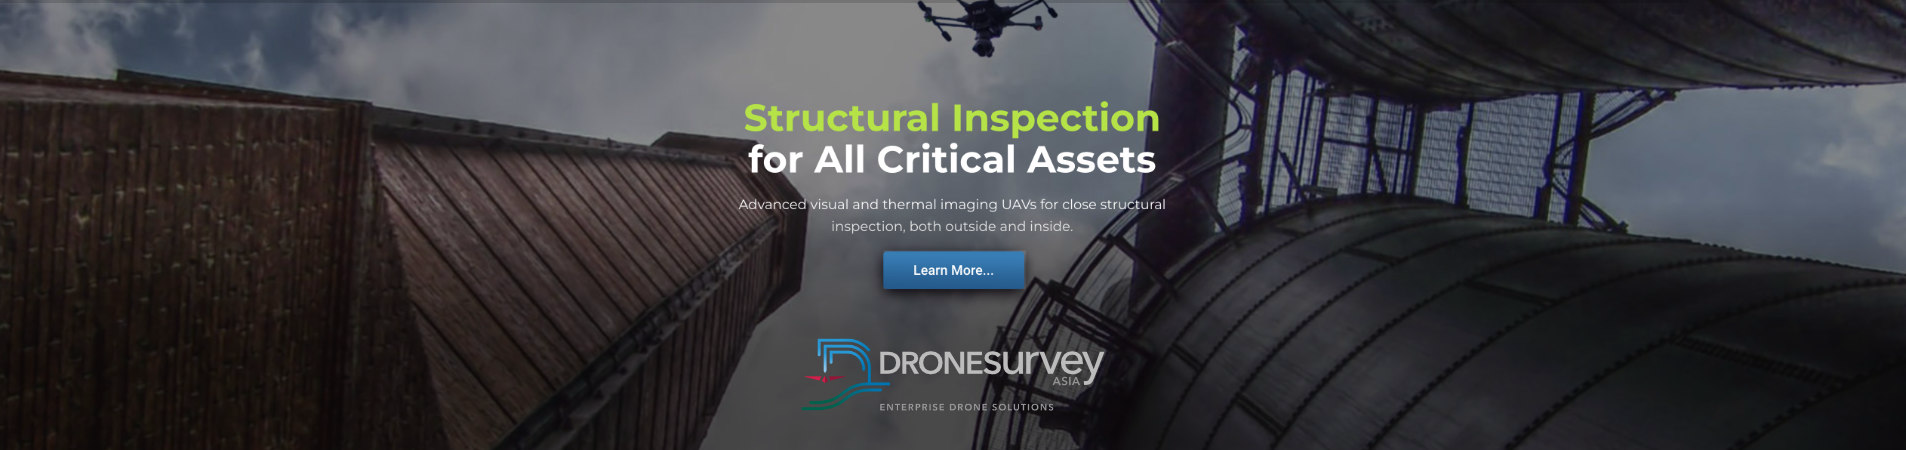 Web Banner-Structural Inspection